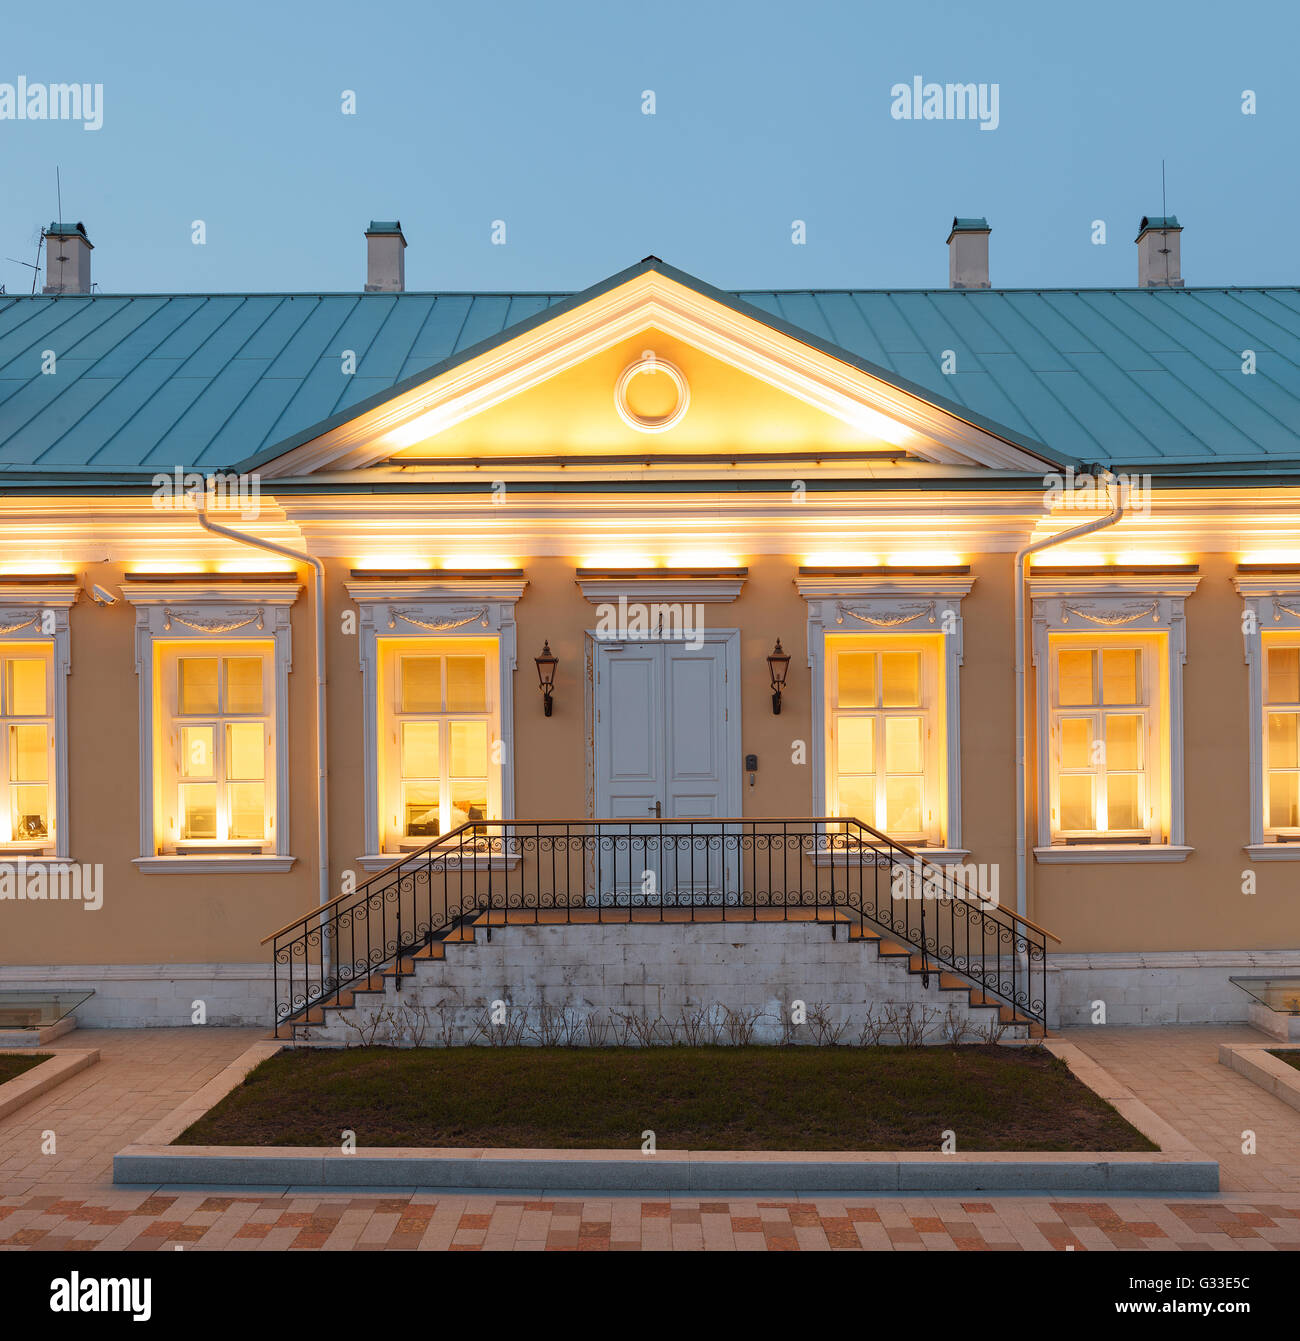 A single storey building in classical palladio style with yellow walls and evening architectural lighting. Moscow, Russia Stock Photo